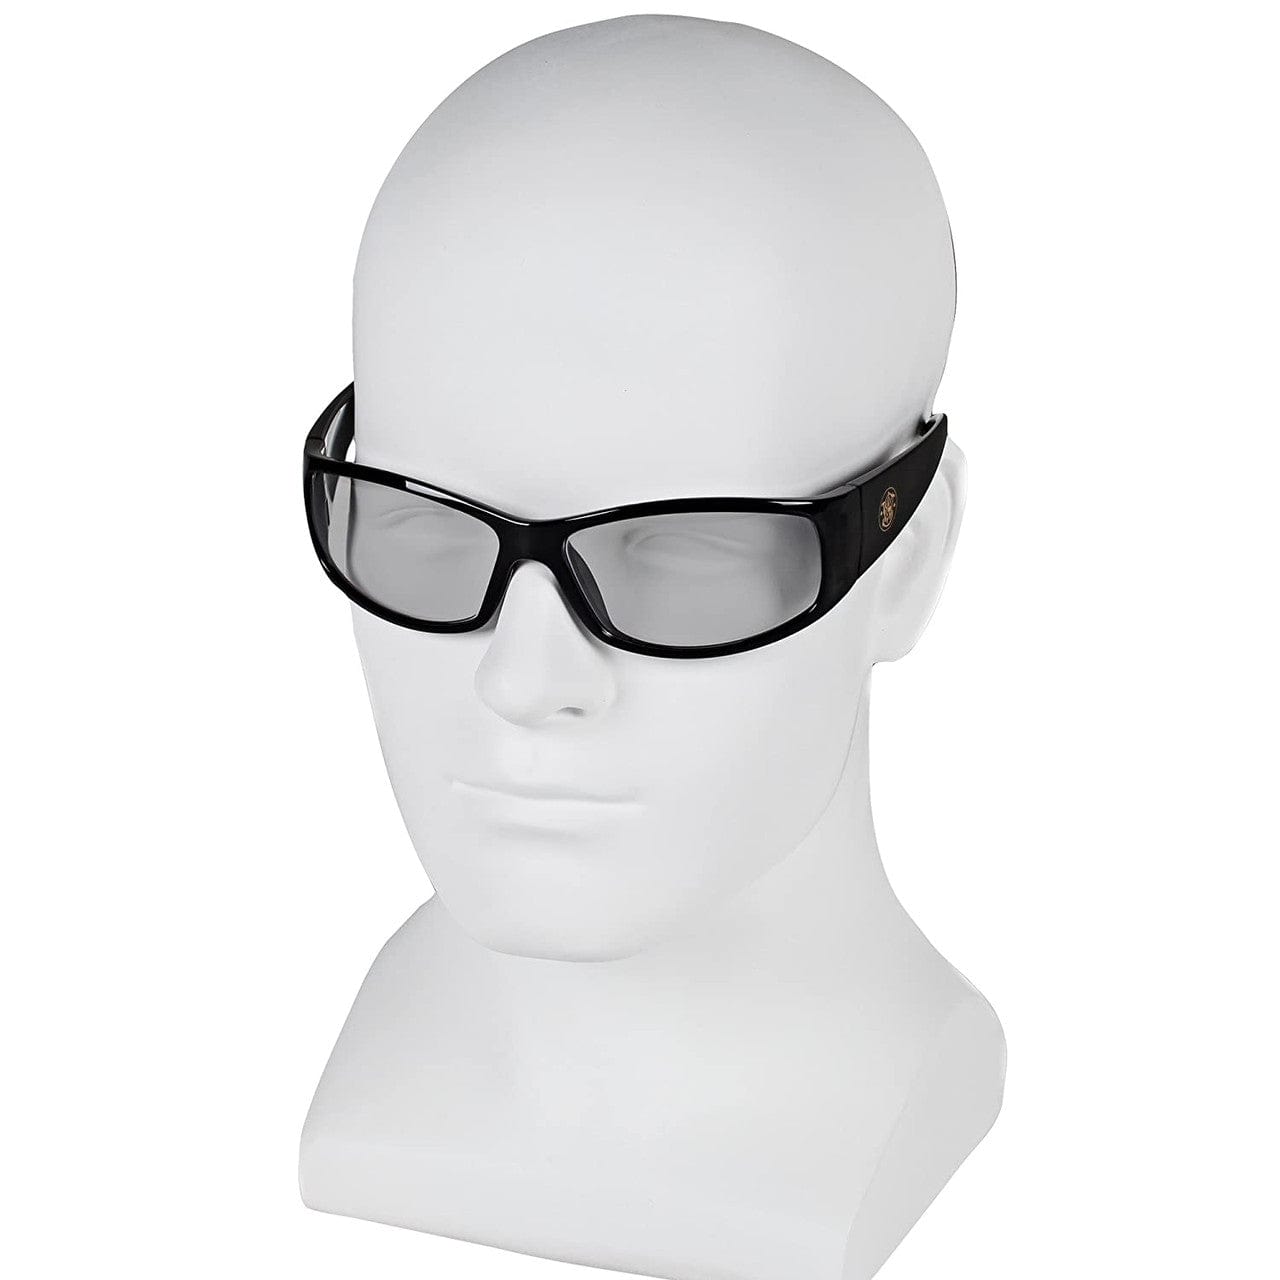 Smith & Wesson® Elite™ Safety Glasses (21306), Indoor/Outdoor